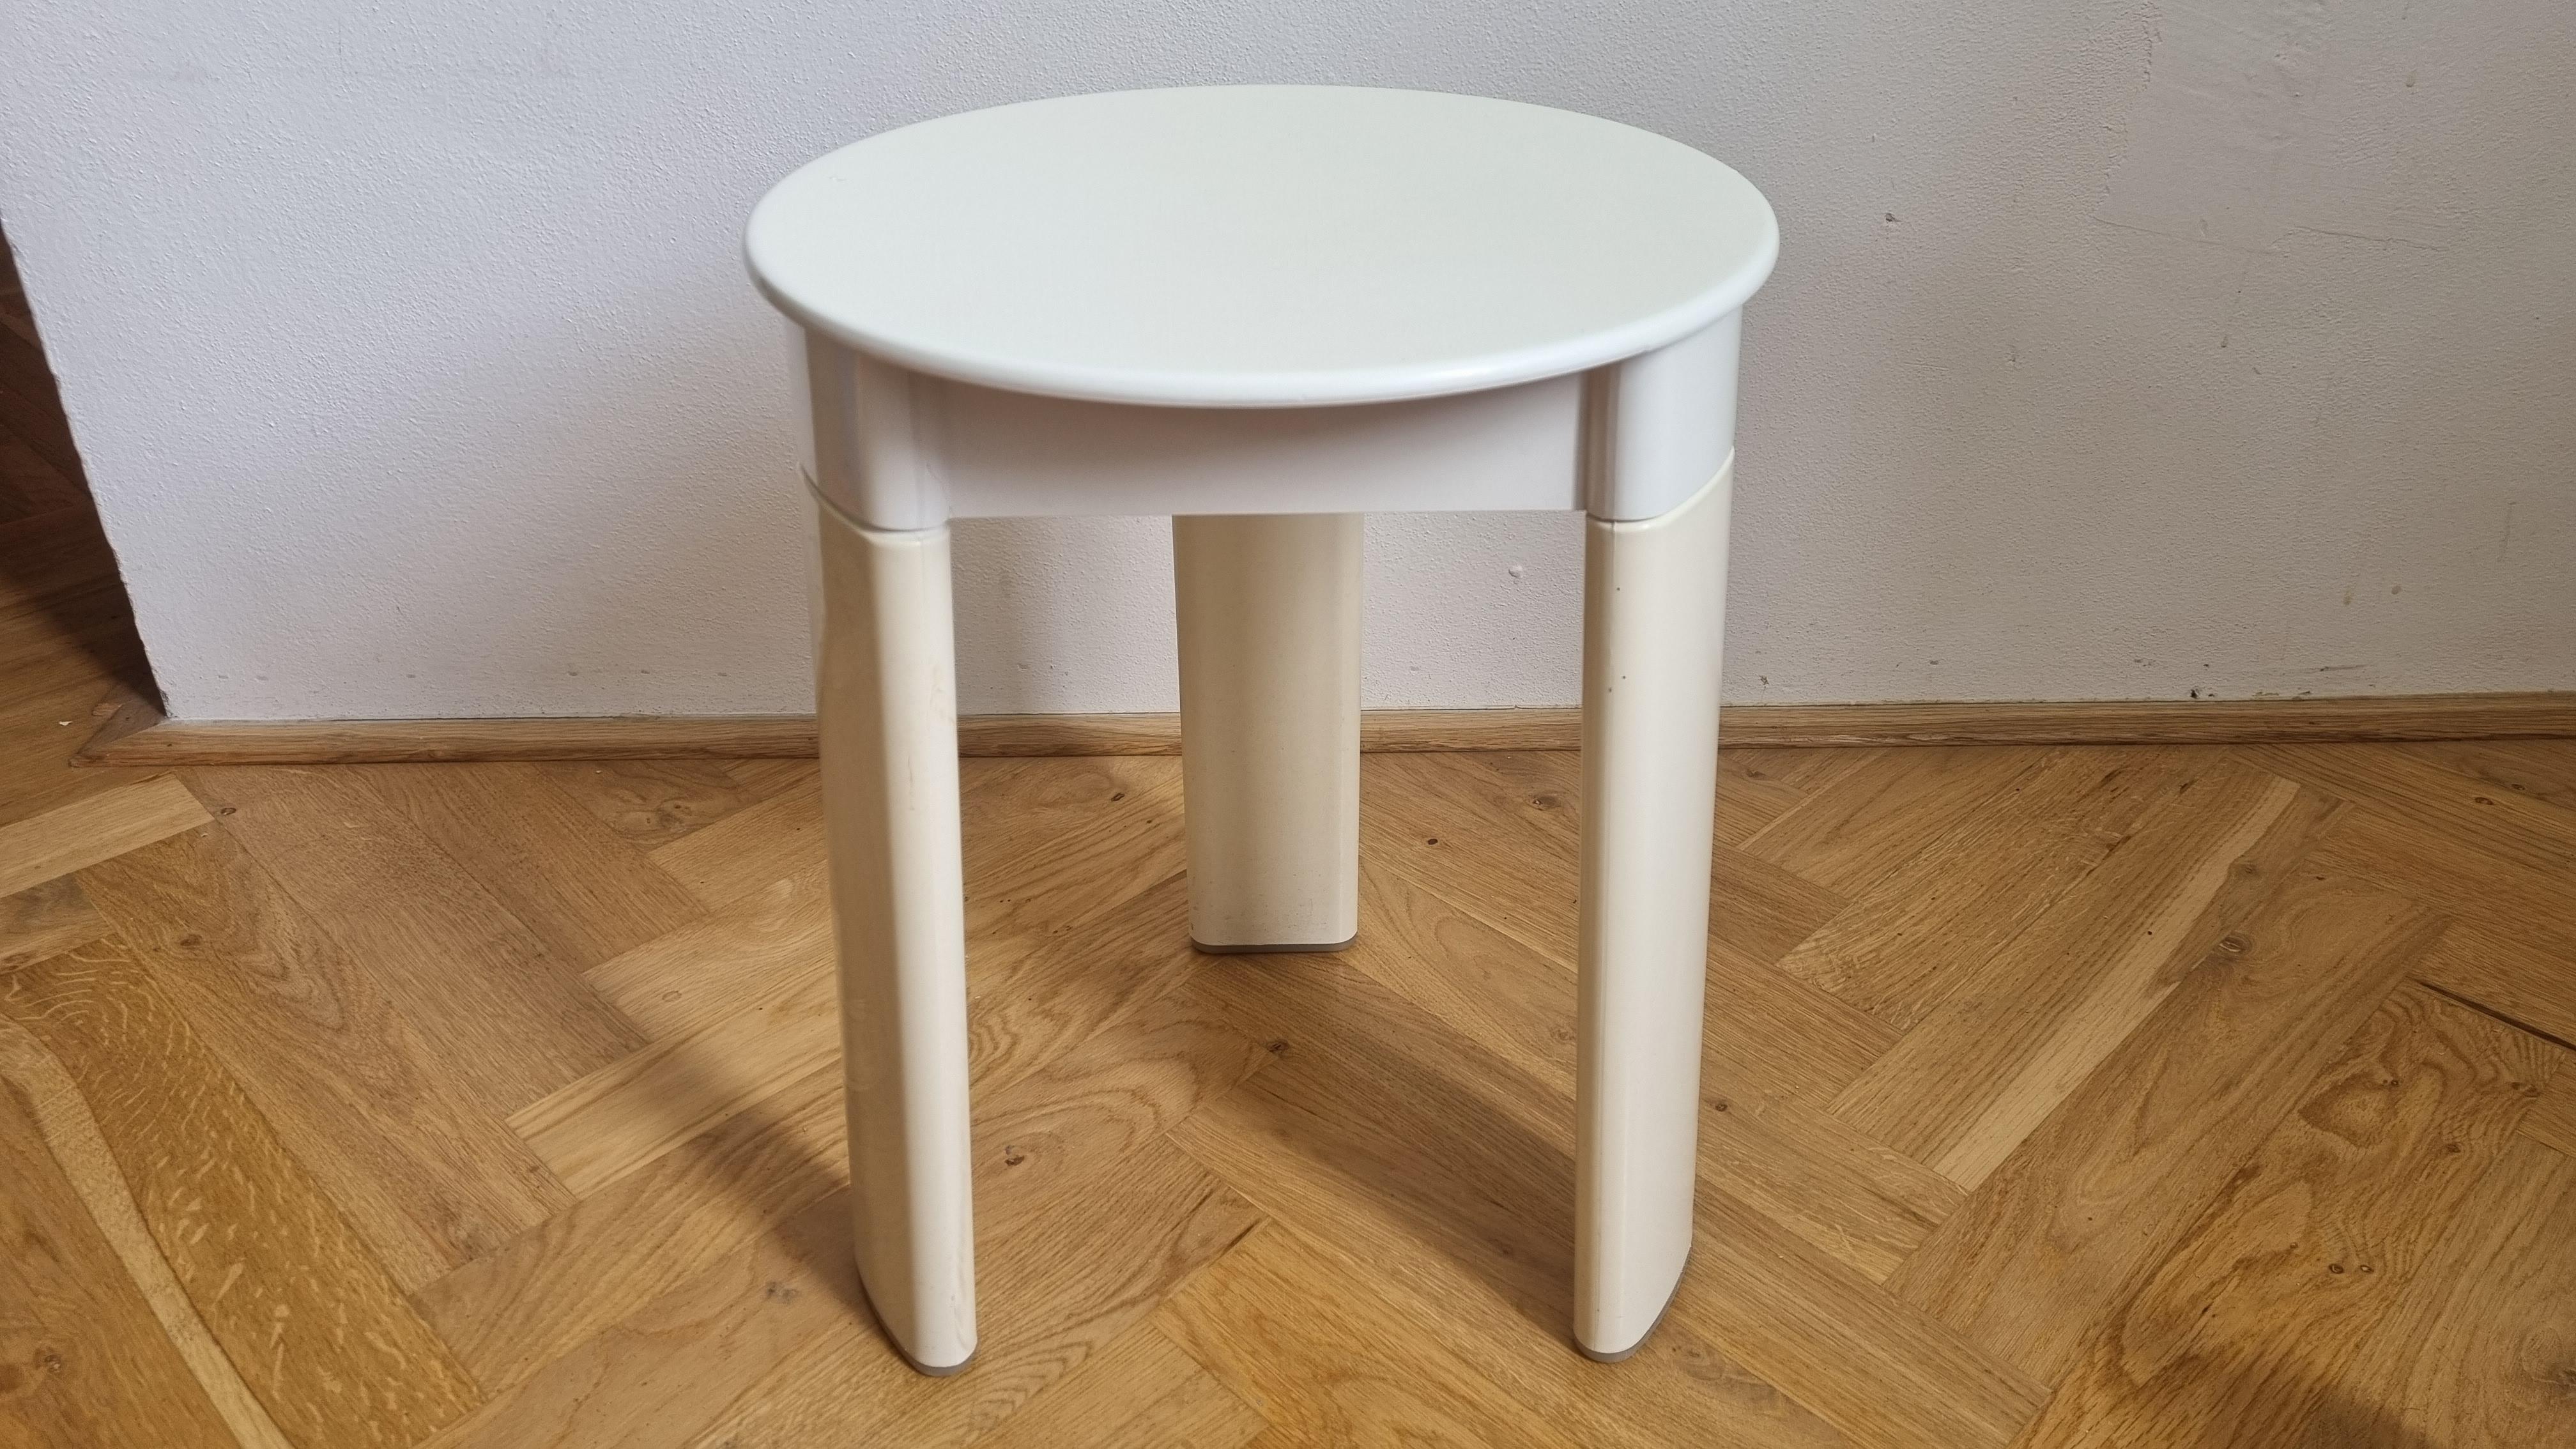 Midcentury Stool or Side Table Trio, Olaf Von Bohr for Gedy, Italy, 1970s For Sale 6